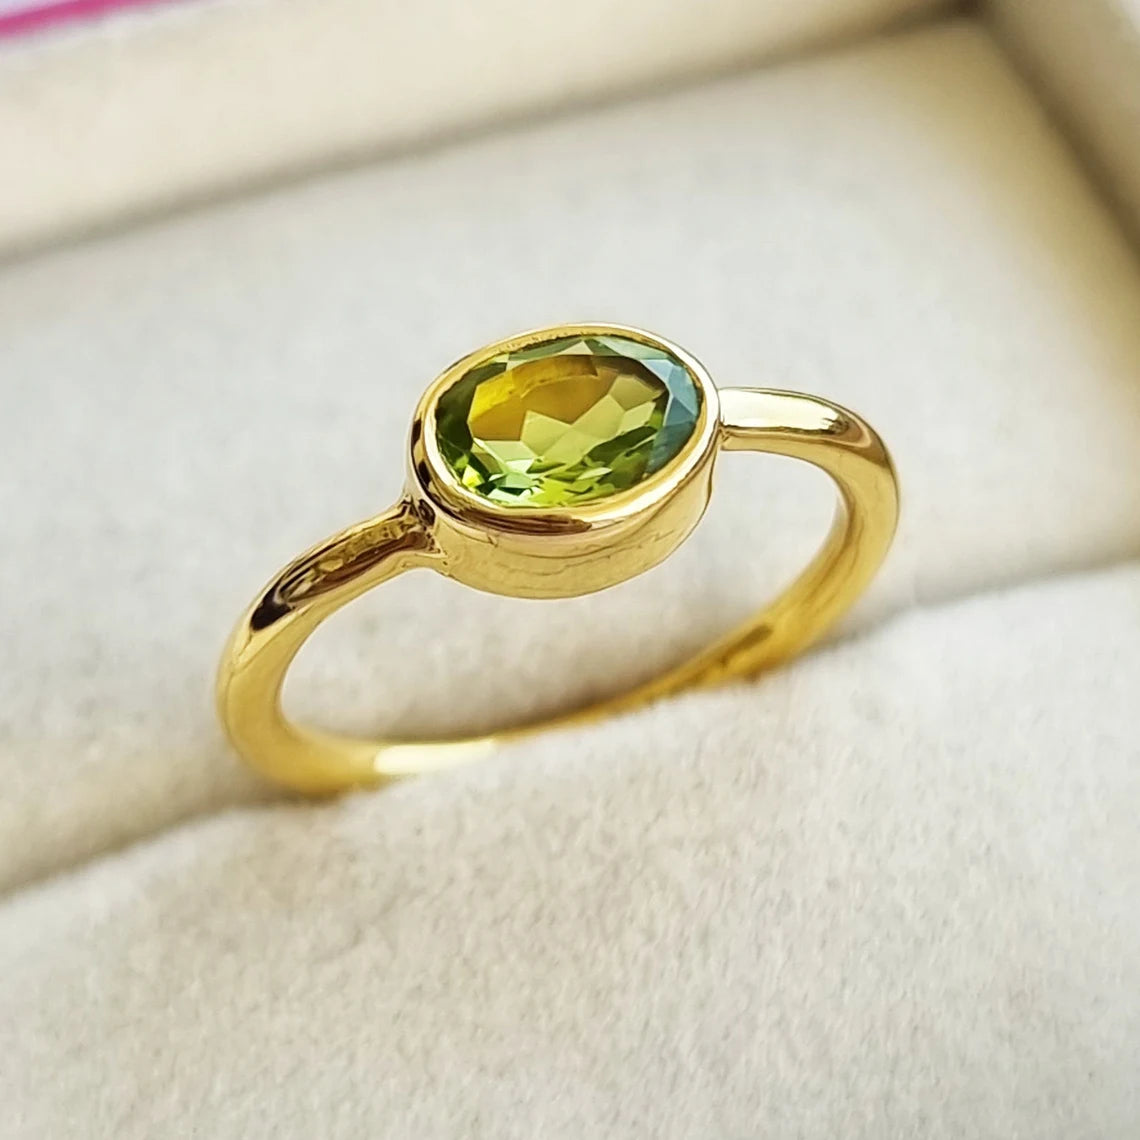 Natural Peridot Oval Gold Ring, Citrine Oval Gold Ring, Oval Cut Blue Topaz Gold Ring, August Birthstone, Jewelry, Green Peridot Gemstone,